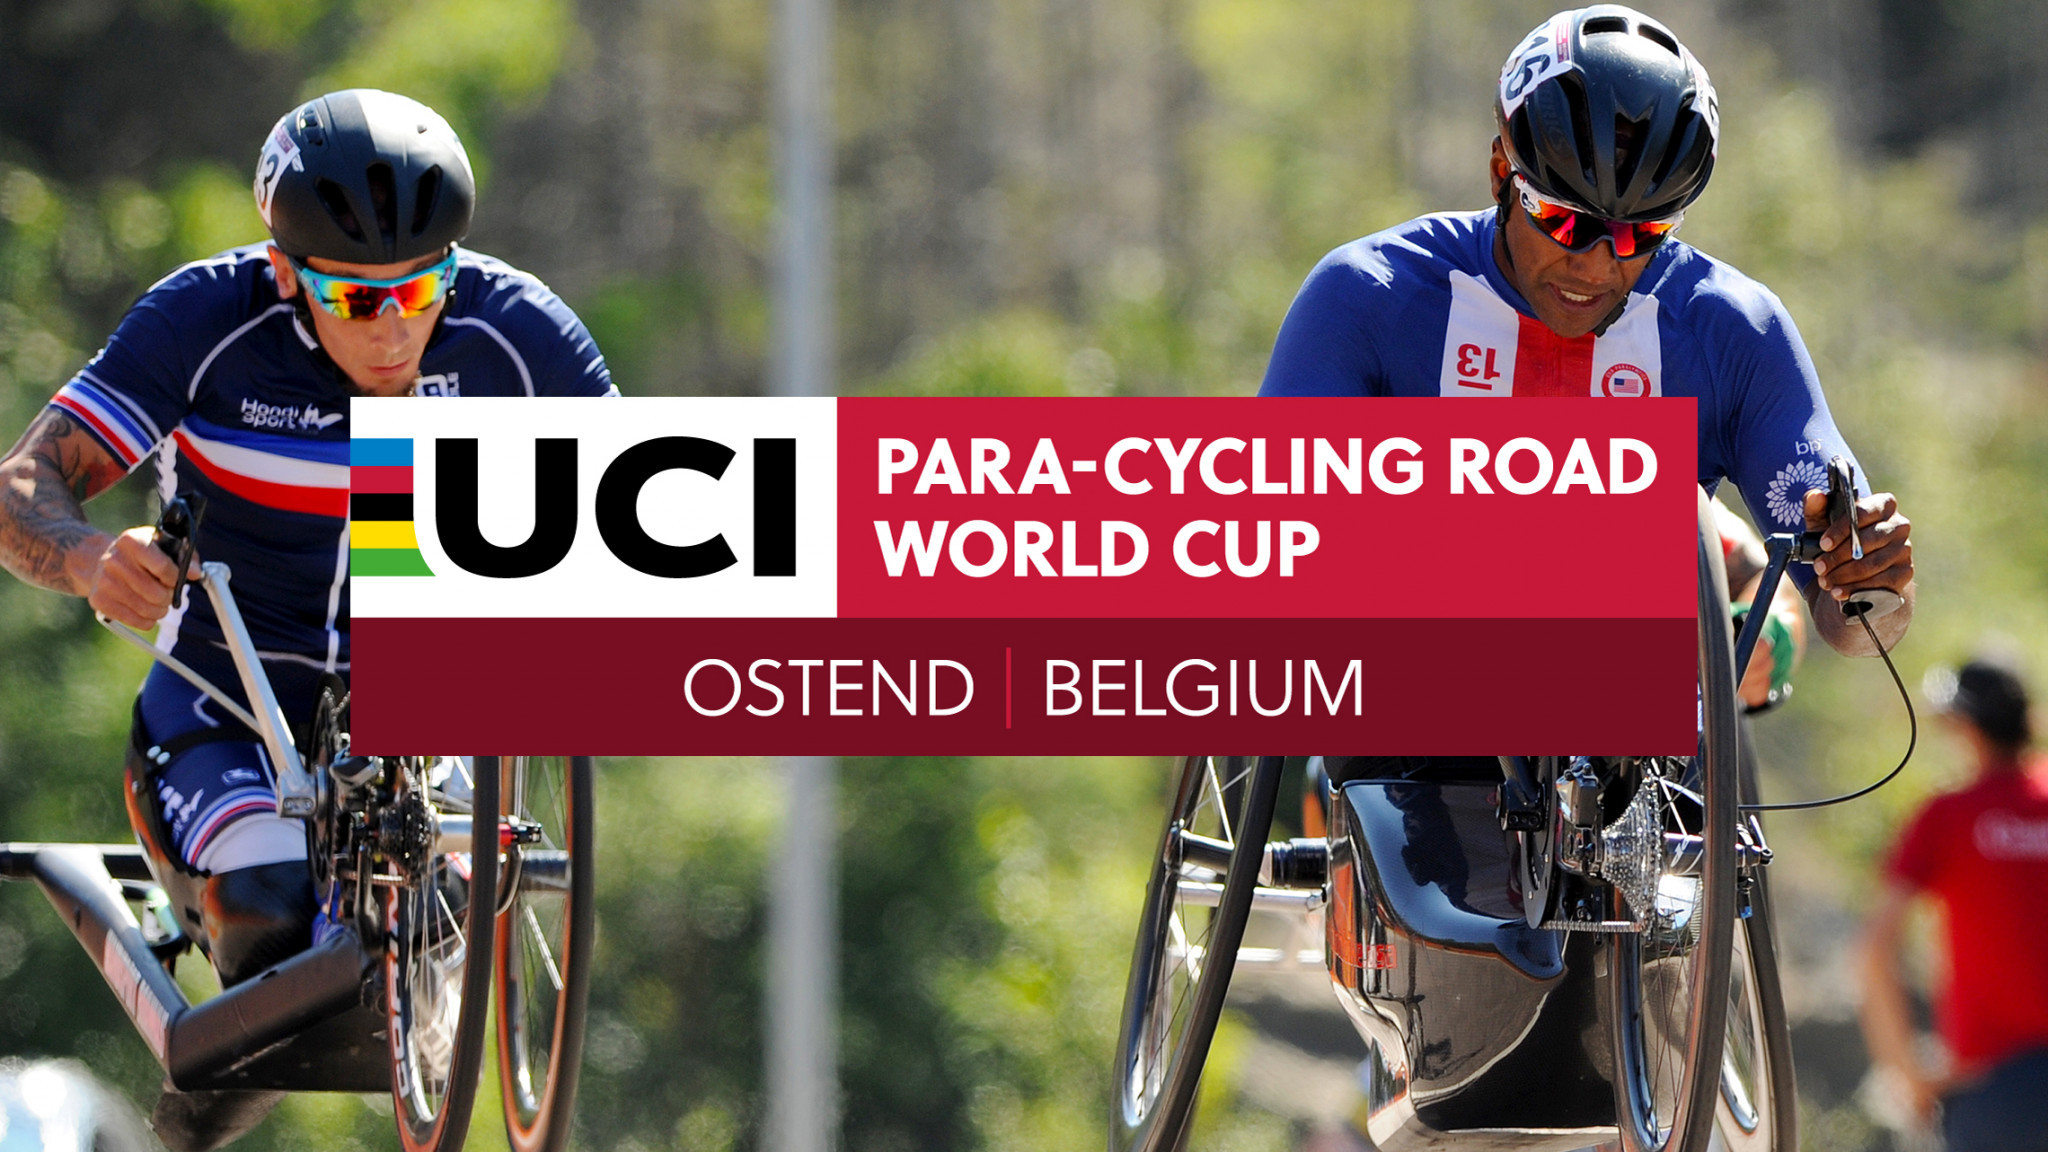 The UCI Para-Cycling Road World Cup season got underway in Ostend ©UCI